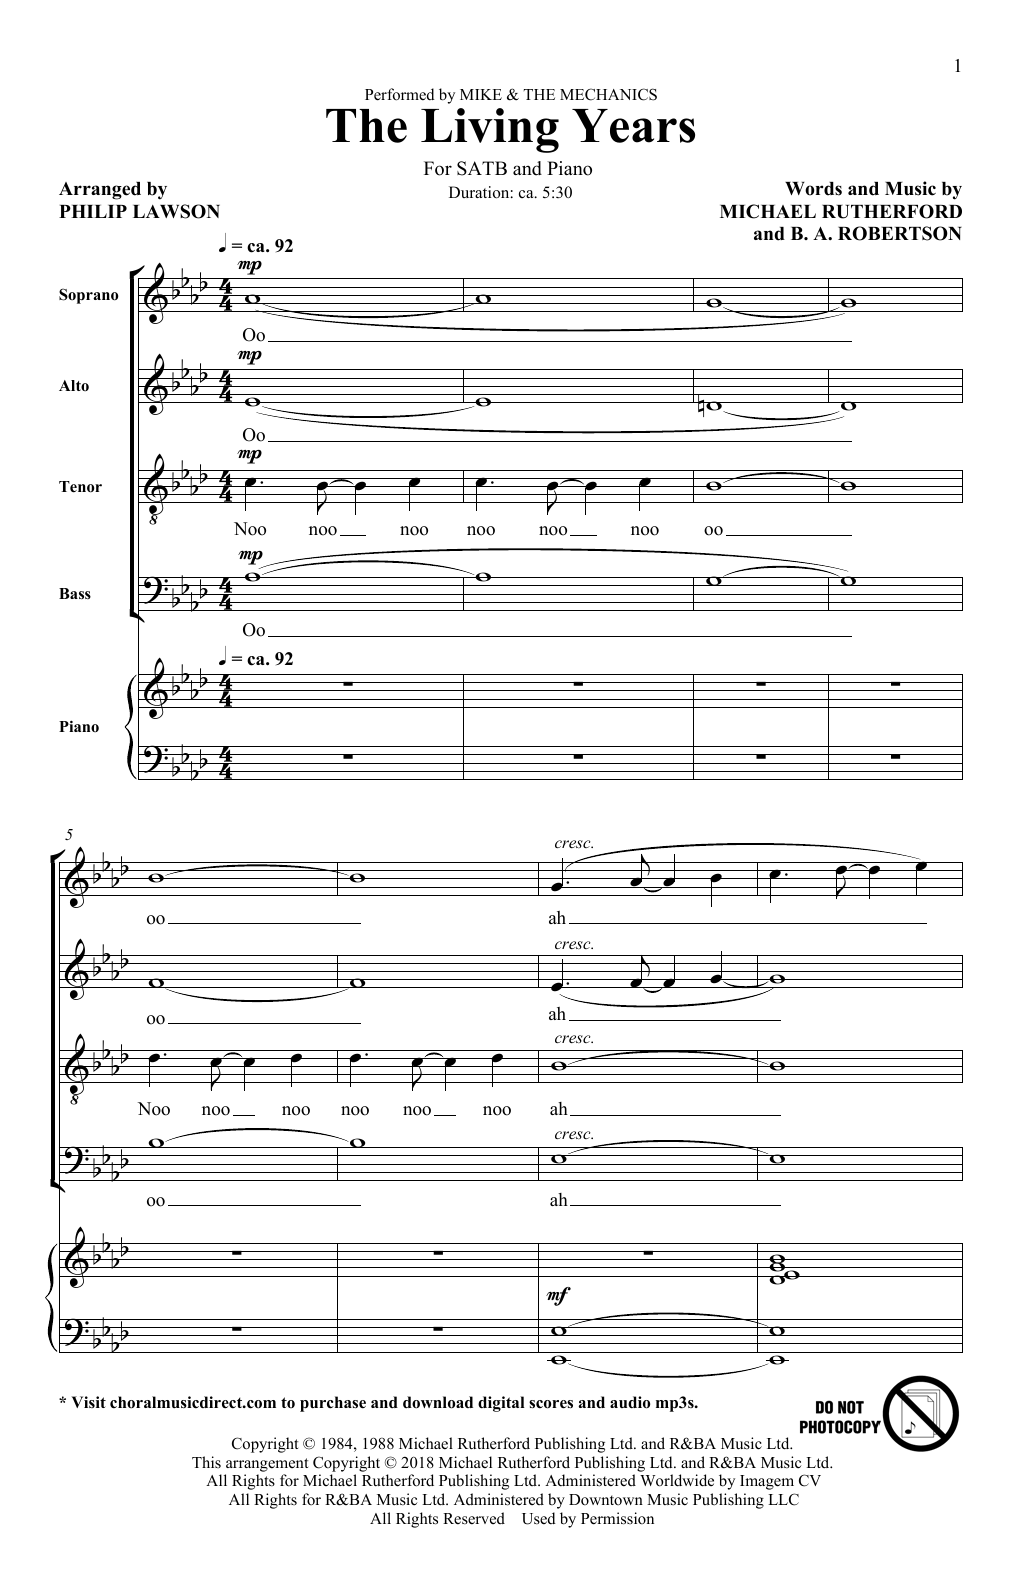 Download Mike and The Mechanics The Living Years (arr. Philip Lawson) Sheet Music